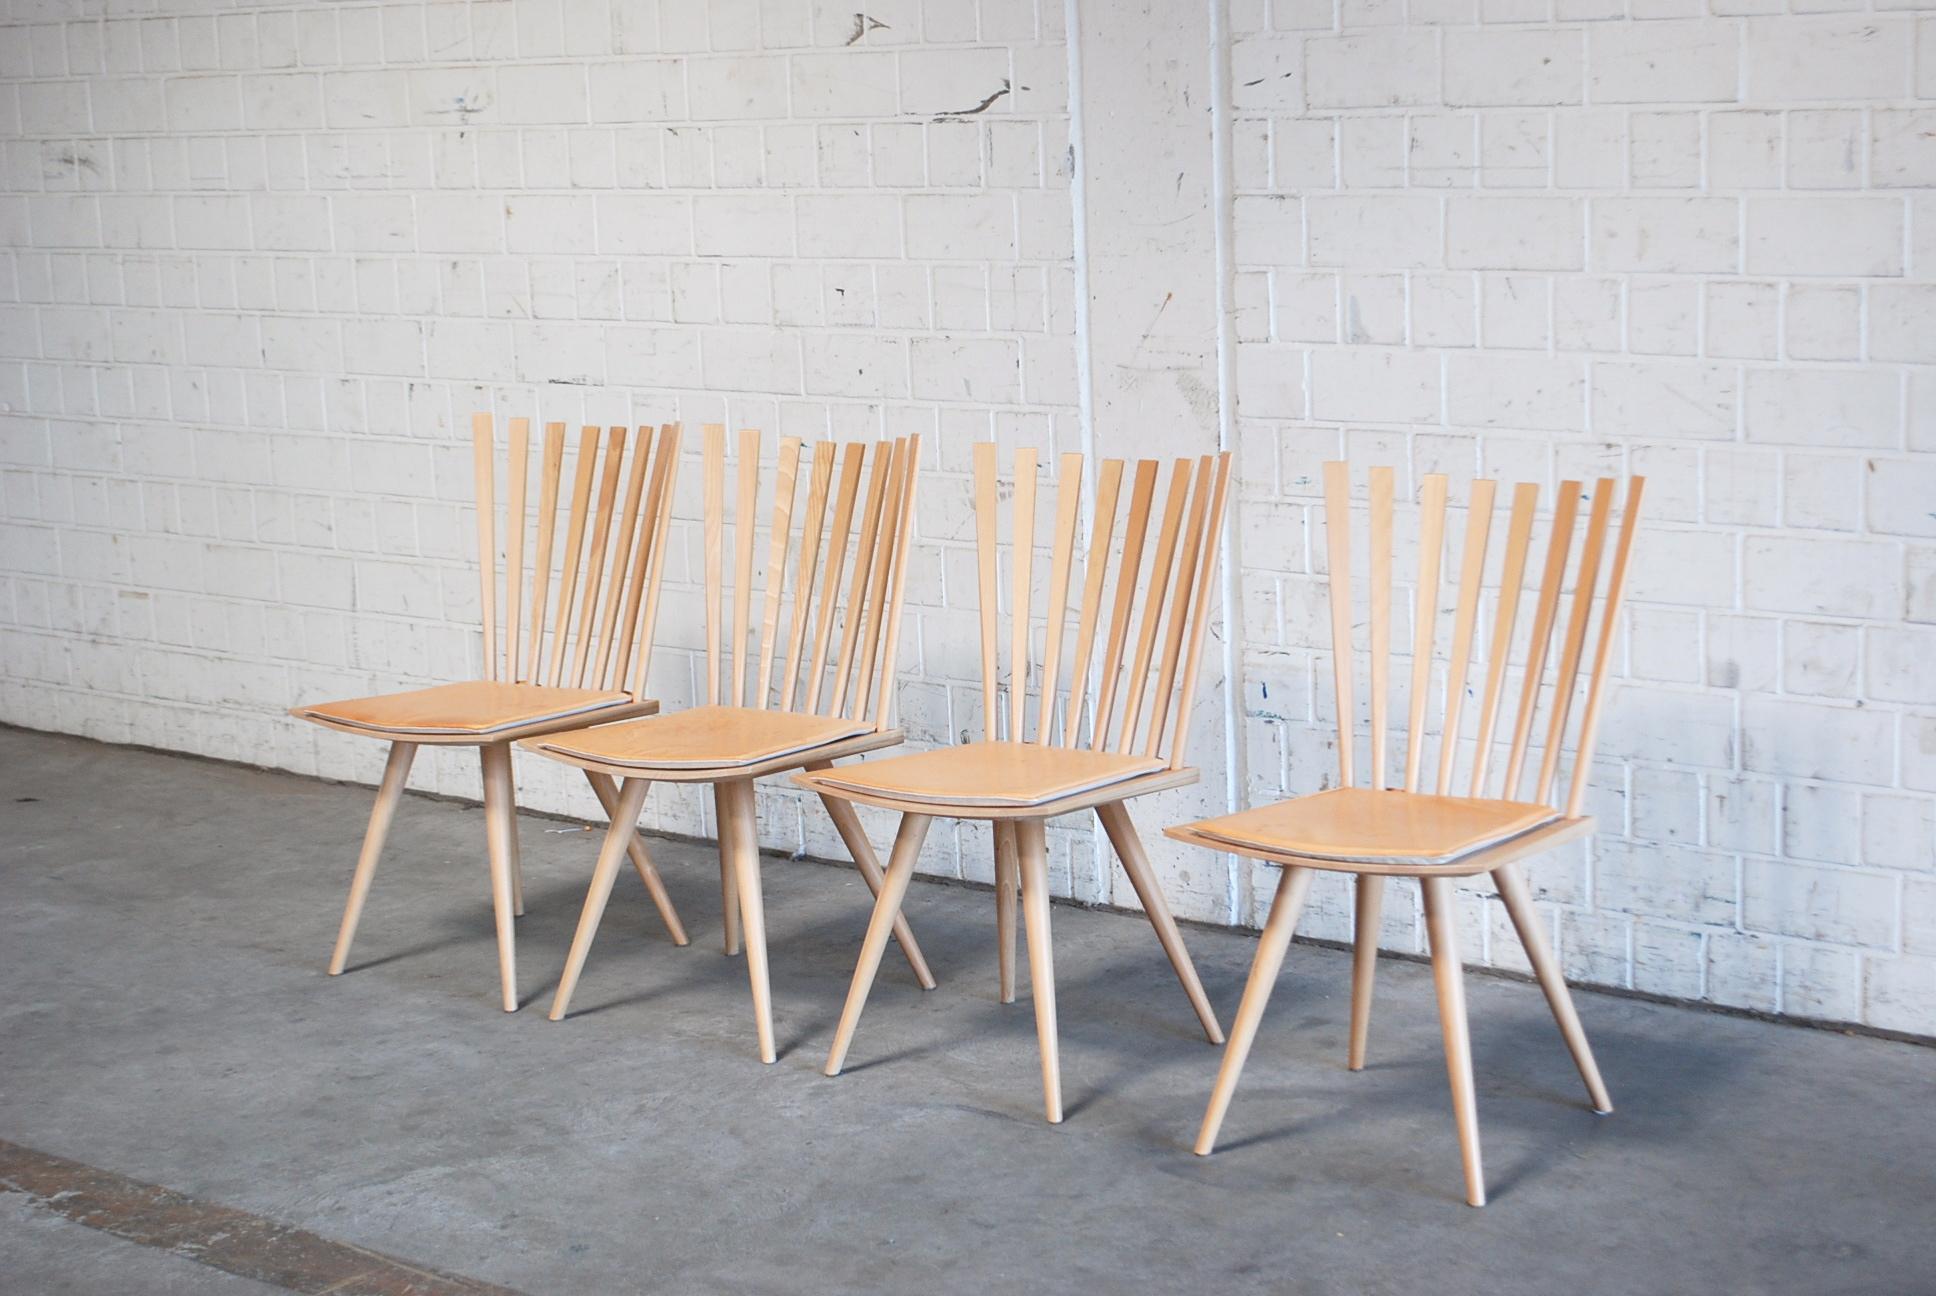 Dining chairs in beech designed Foersom & Hiort-Lorenzen and produced Fredericia Stolefabrik.
This set of four Mikado dining chairs in solid beech comes with the removable original vegetal soft pad leather cushions, with the other side in flax